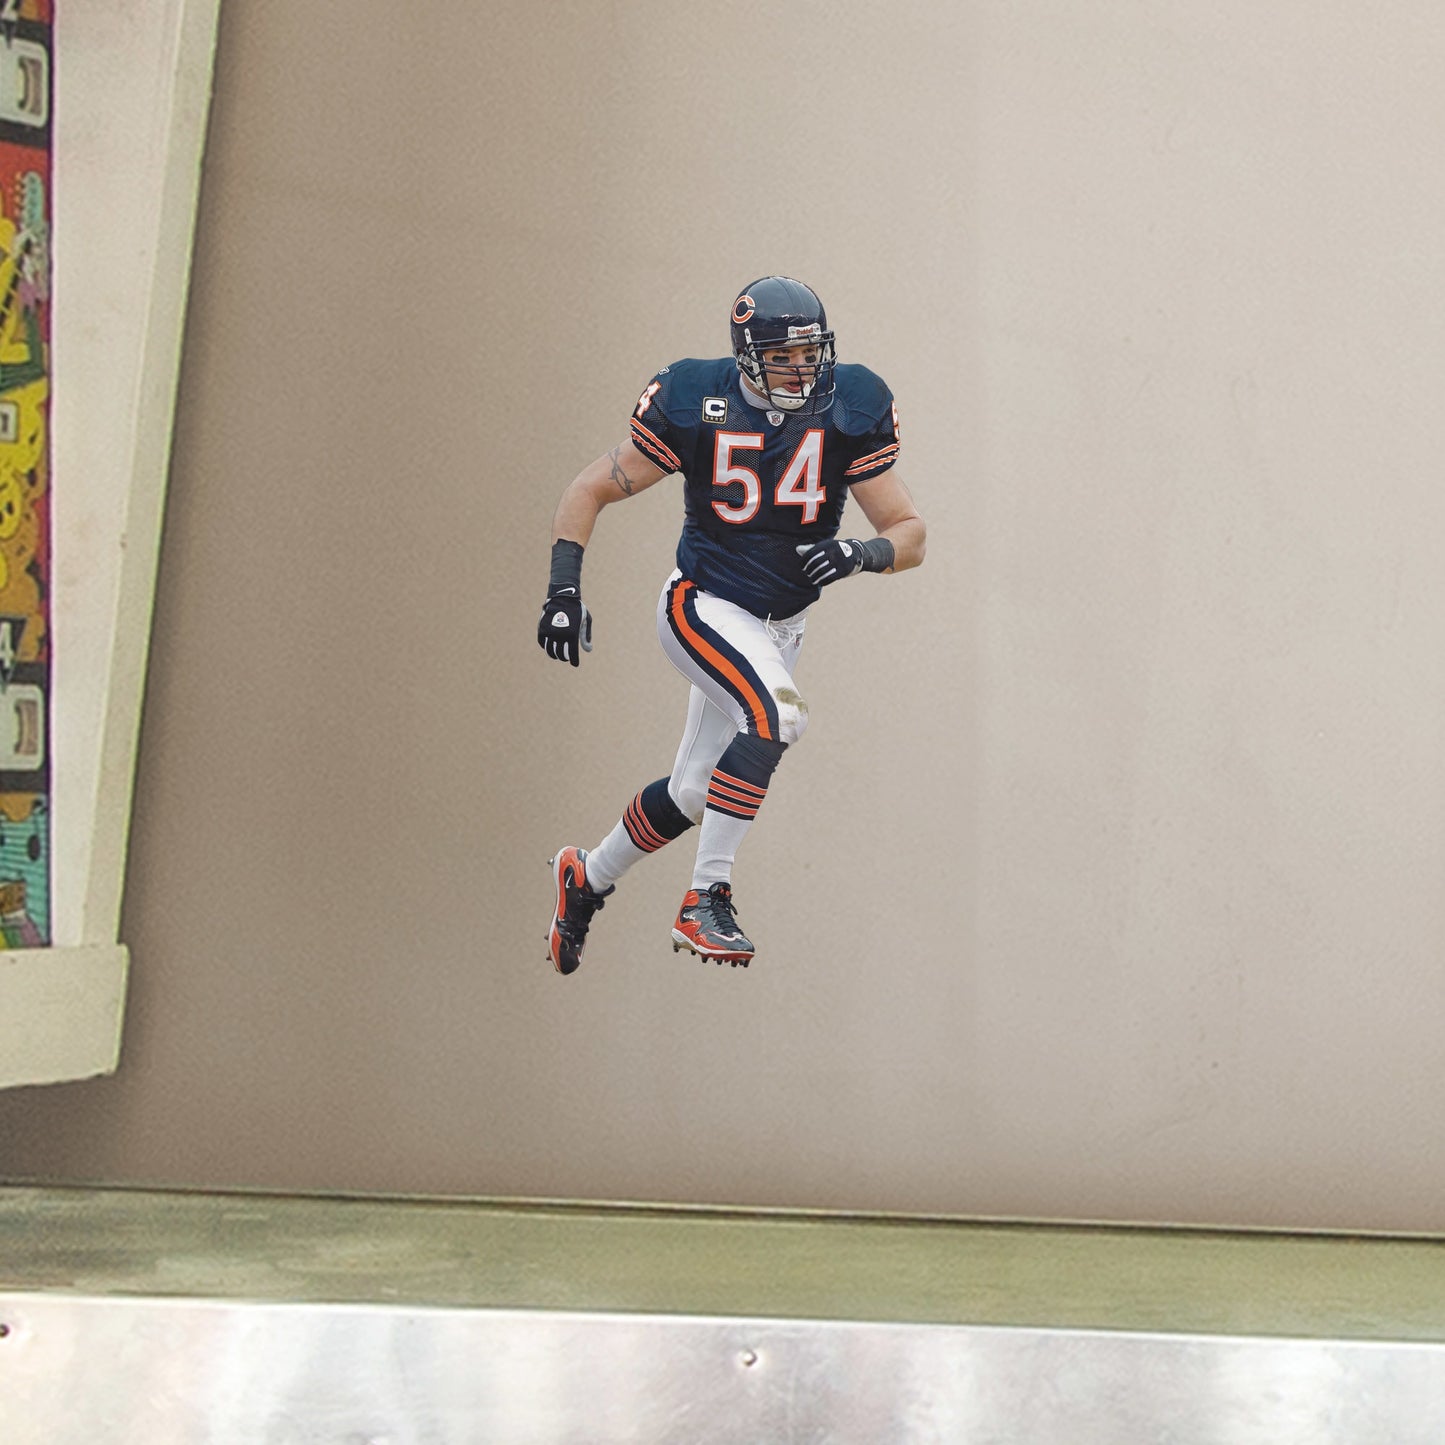 Large Athlete + 2 Decals (9"W x 16.5"H) For 13 years, the Chicago Bears watched #54 earn his place as one of the Top 100 Bears of All time. Rep the navy blue and burnt orange with a high-grade vinyl decal of Da Bears legend Brian Urlacher. Removable, reusable, and tear-resistant, this Hall of Famer is great for bedrooms, man caves, or even as a temporary party decoration. Bear down, Chicago Bears!